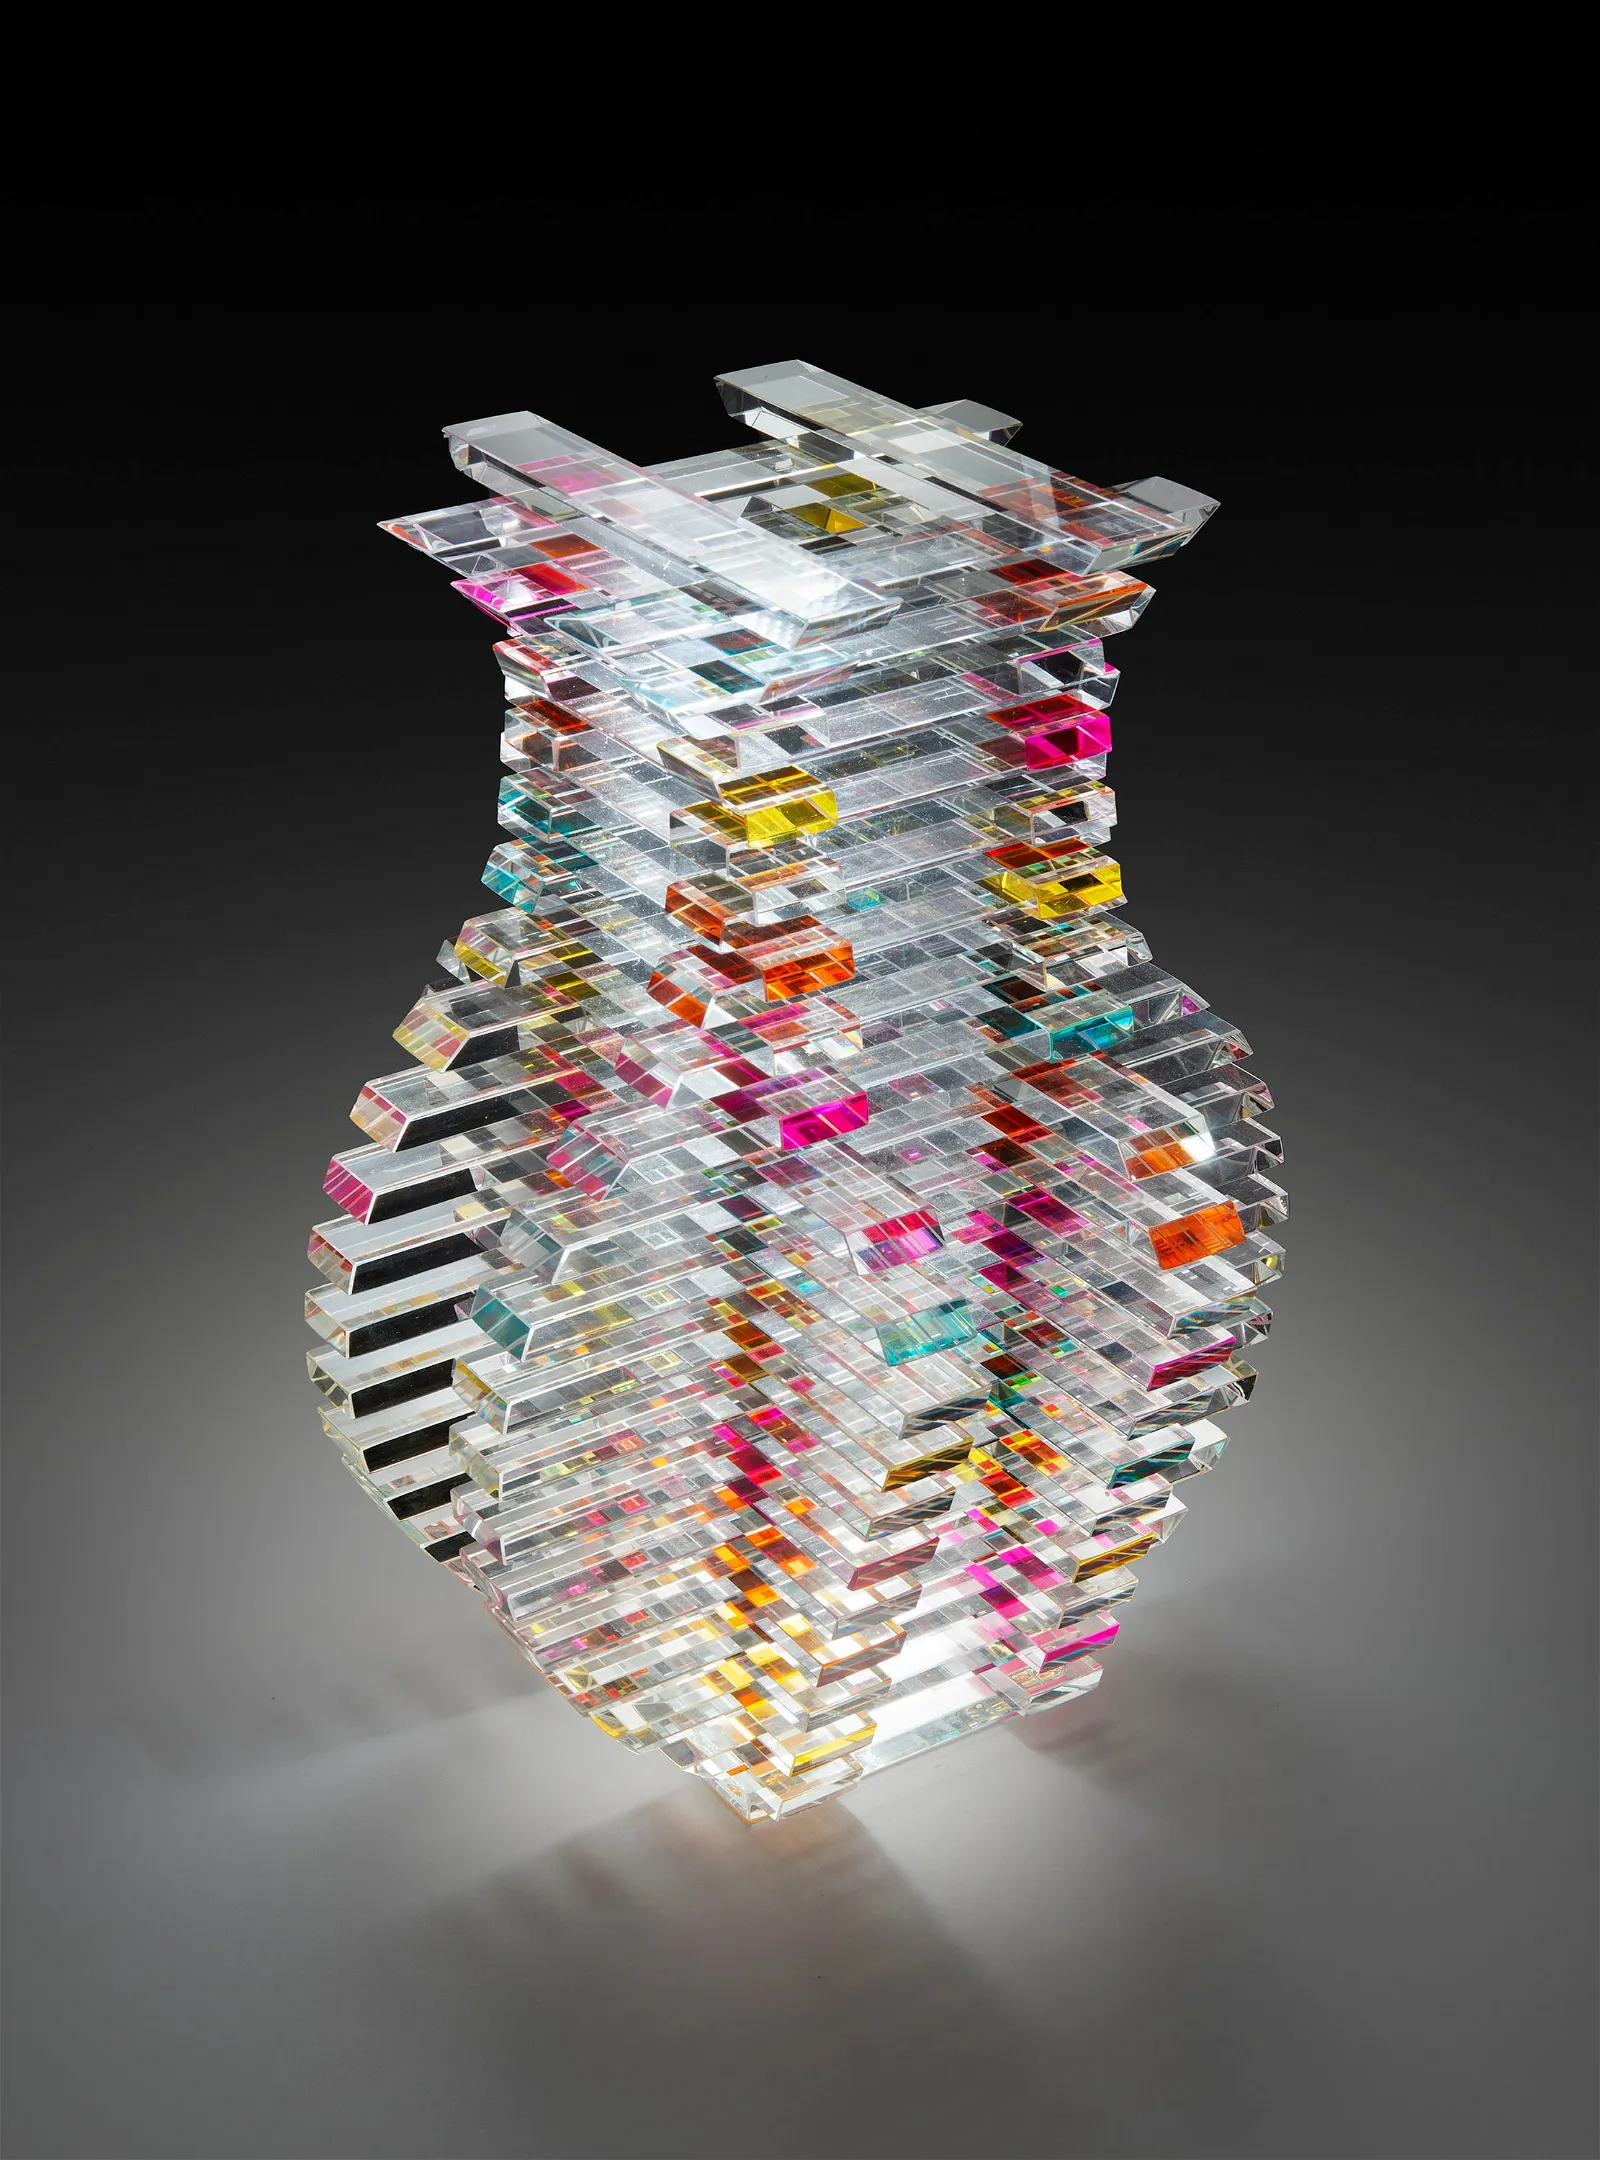 Sidney Hutter’s ‘White House Cubic Heart Vase #14,’ estimated at $20,000-$25,000.